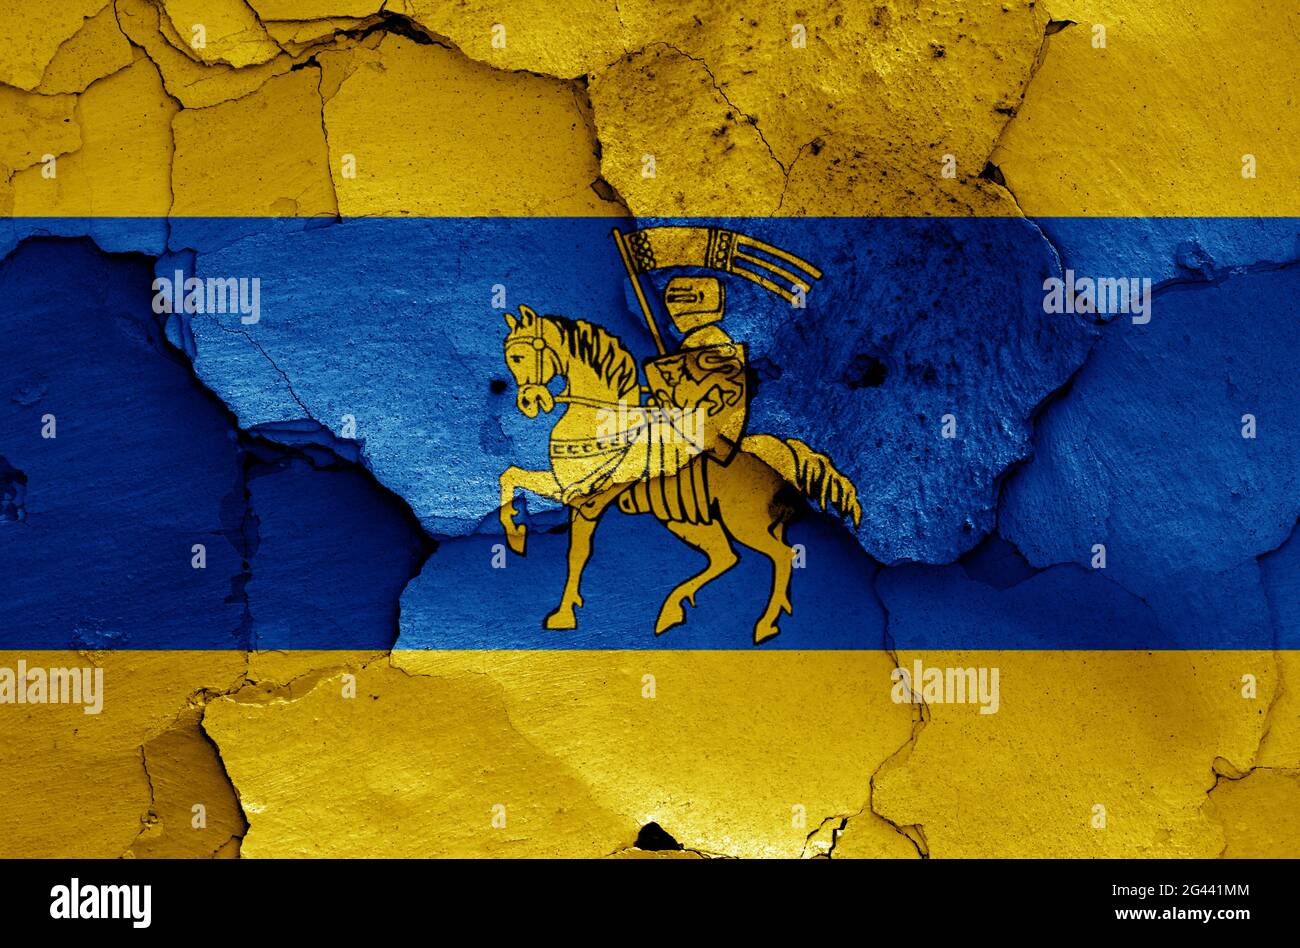 Flag of Schwerin painted on cracked wall Stock Photo